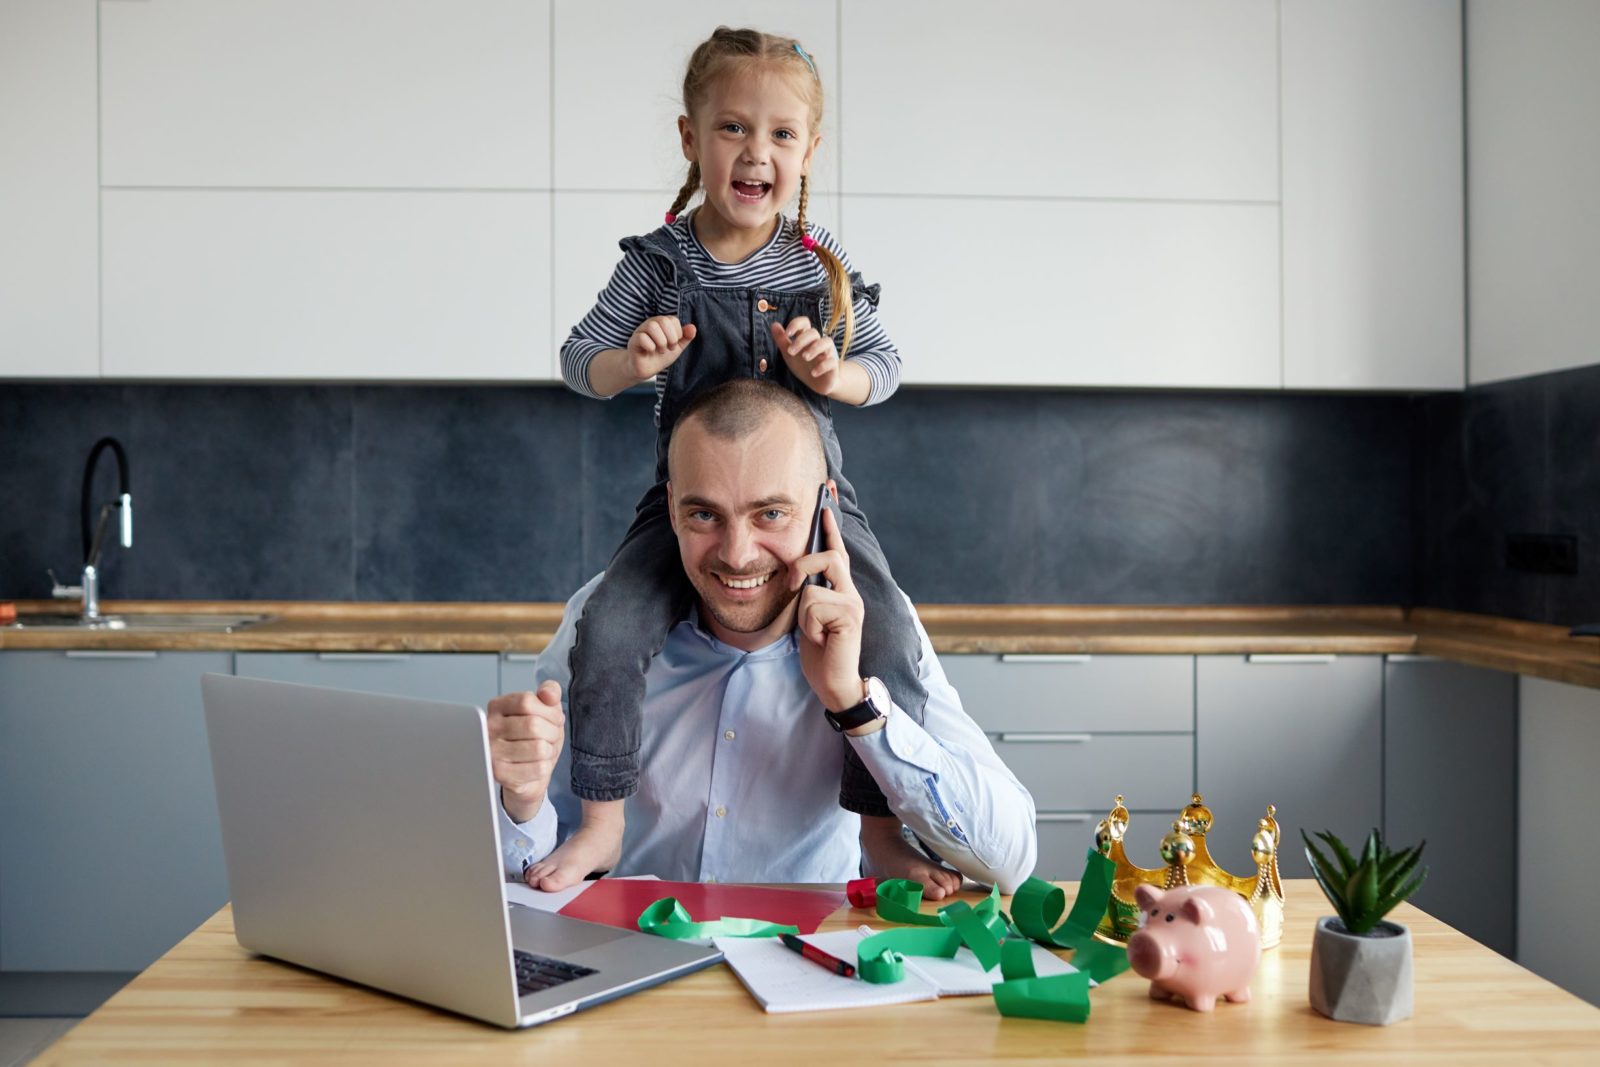 legal professional tries to succeed at remote work while distracted by family